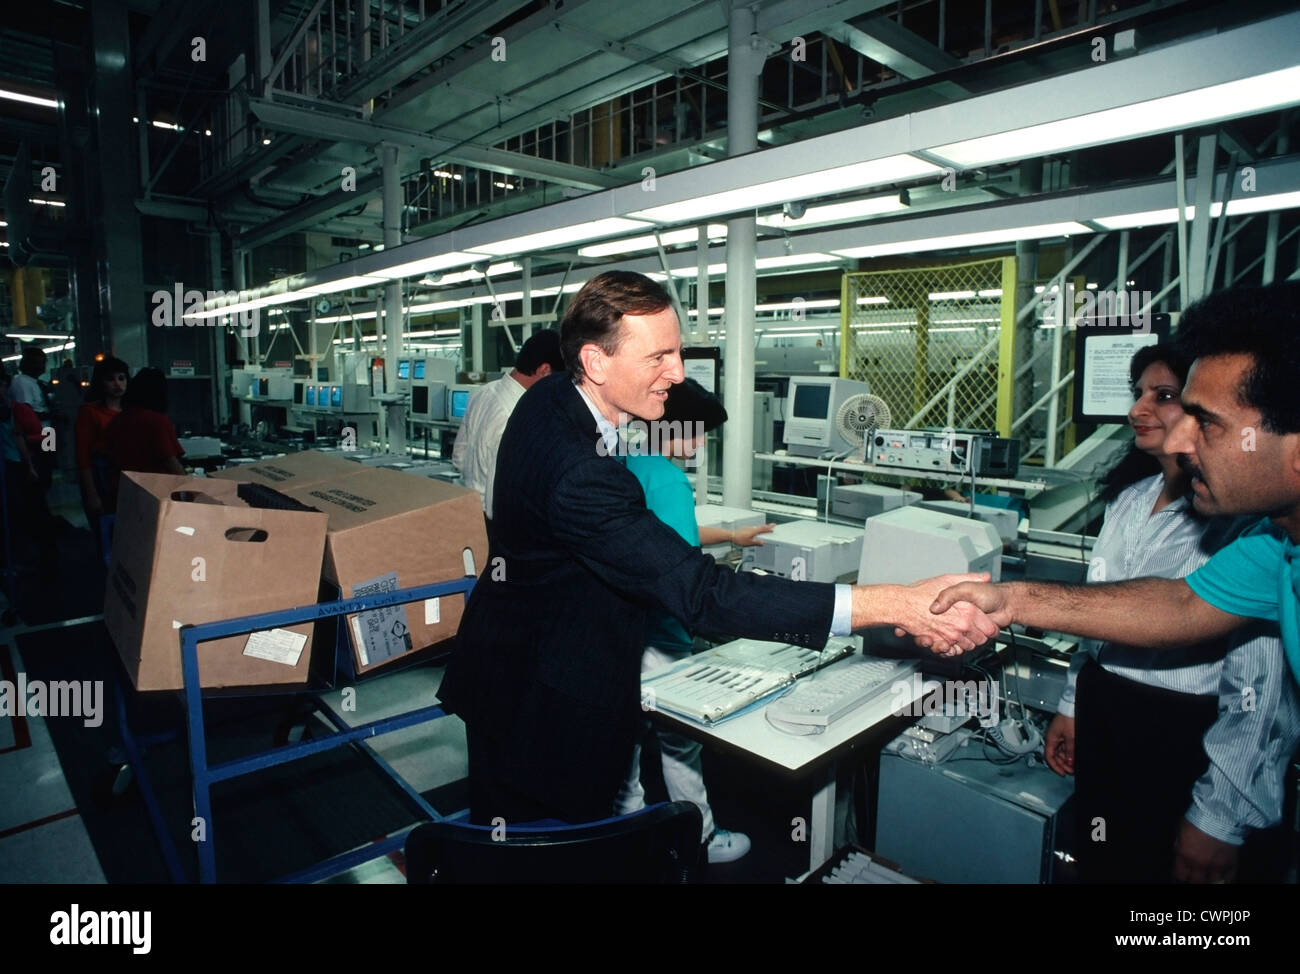 John Sculley, Apple CEO from 1983 until 1993, Shakes hands with Apple  employees at the Apple assembly Plant in Freemont, CA Stock Photo